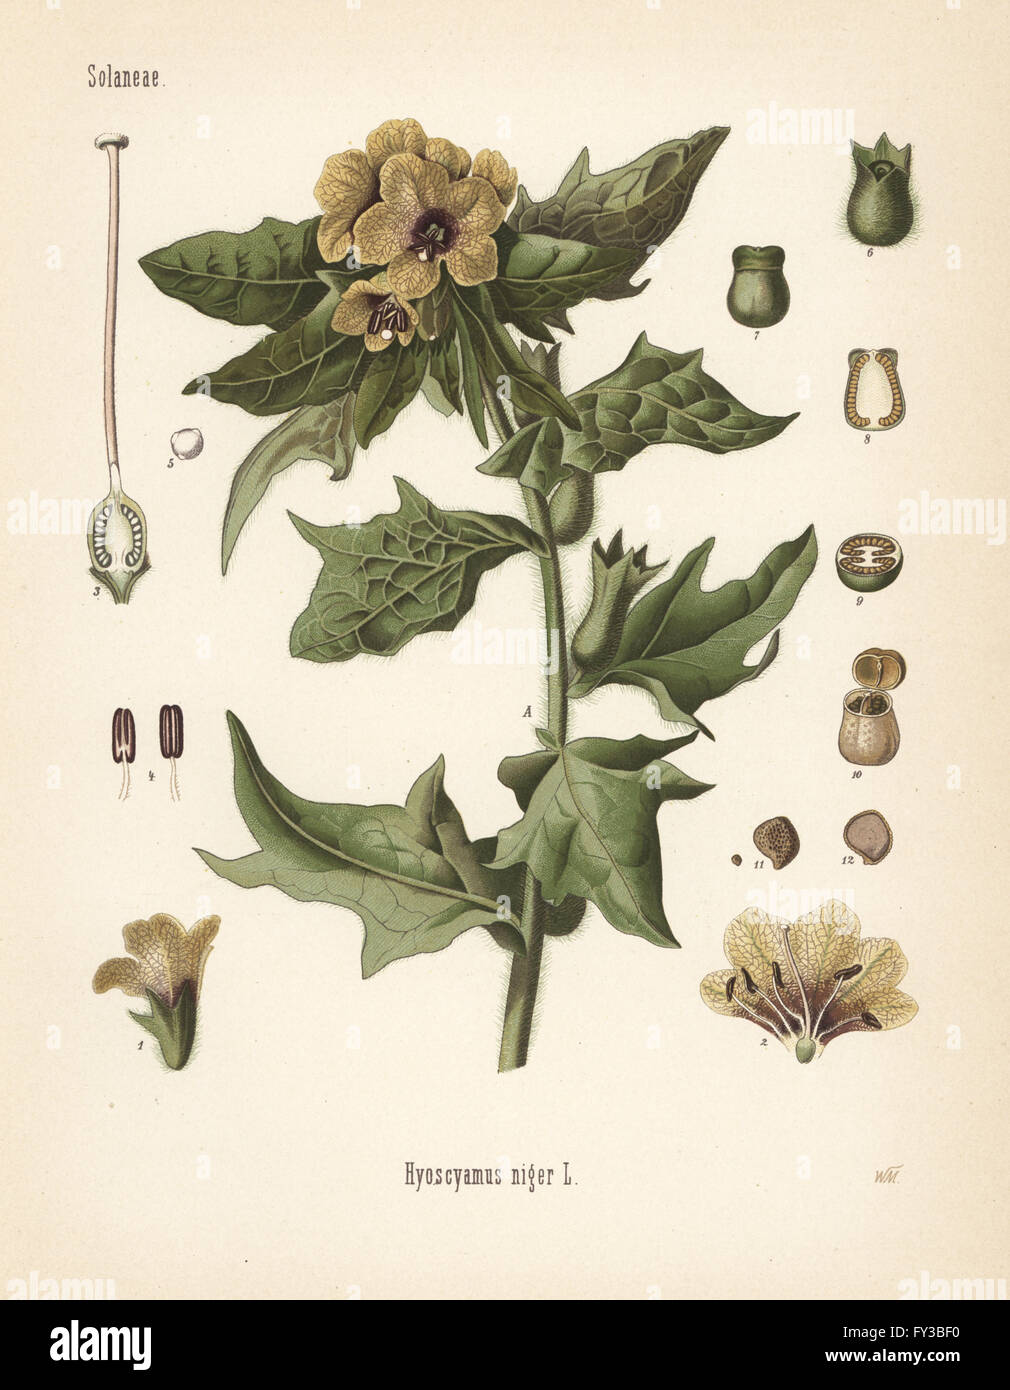 Henbane, Hyoscyamus niger. Chromolithograph after a botanical illustration by Walther Muller from Hermann Adolph Koehler's Medicinal Plants, edited by Gustav Pabst, Koehler, Germany, 1887. Stock Photo